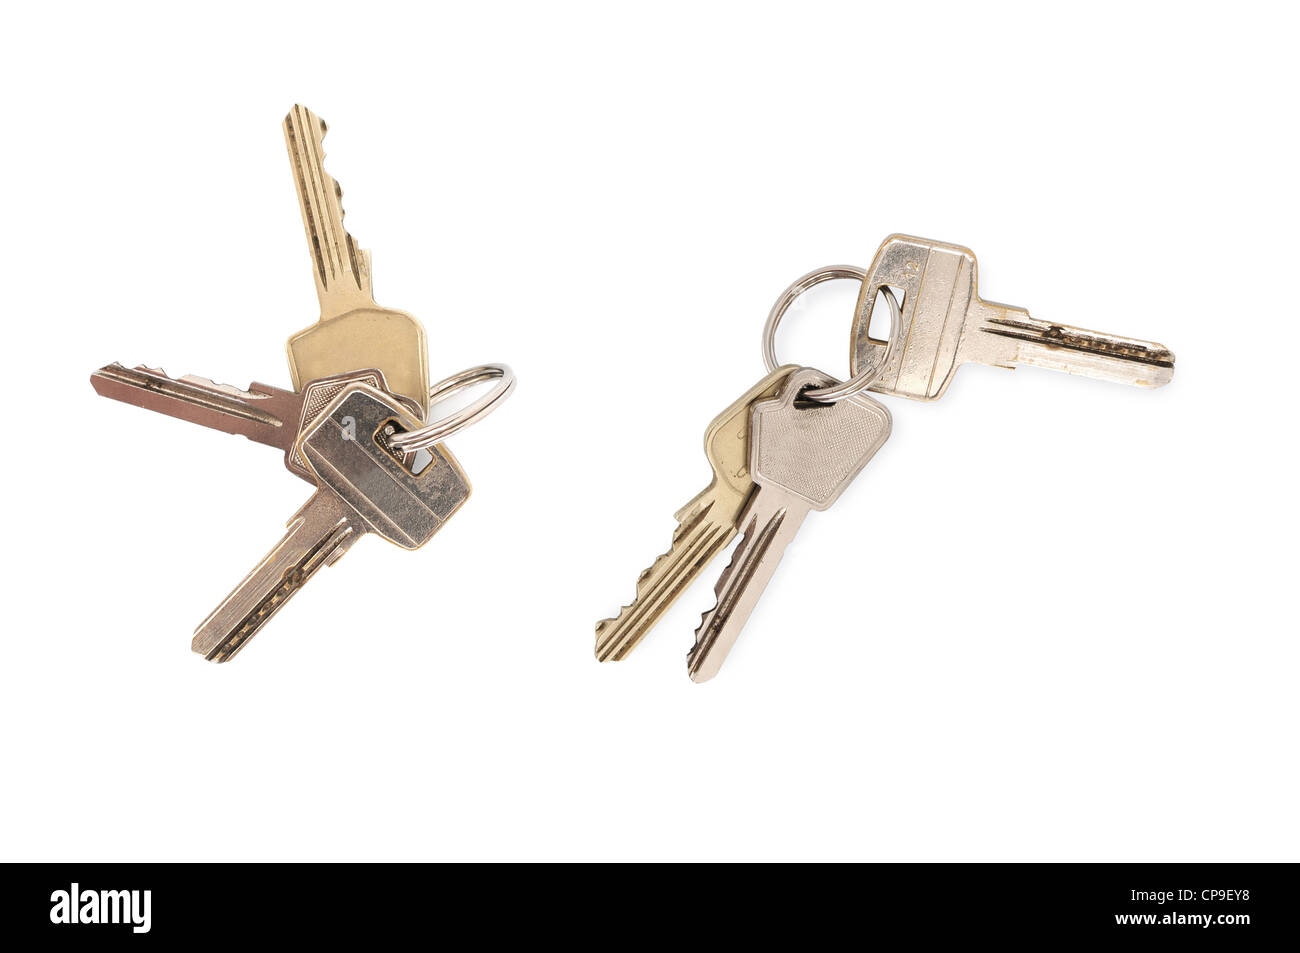 Two sets of keys on ring isolated on white background Stock Photo